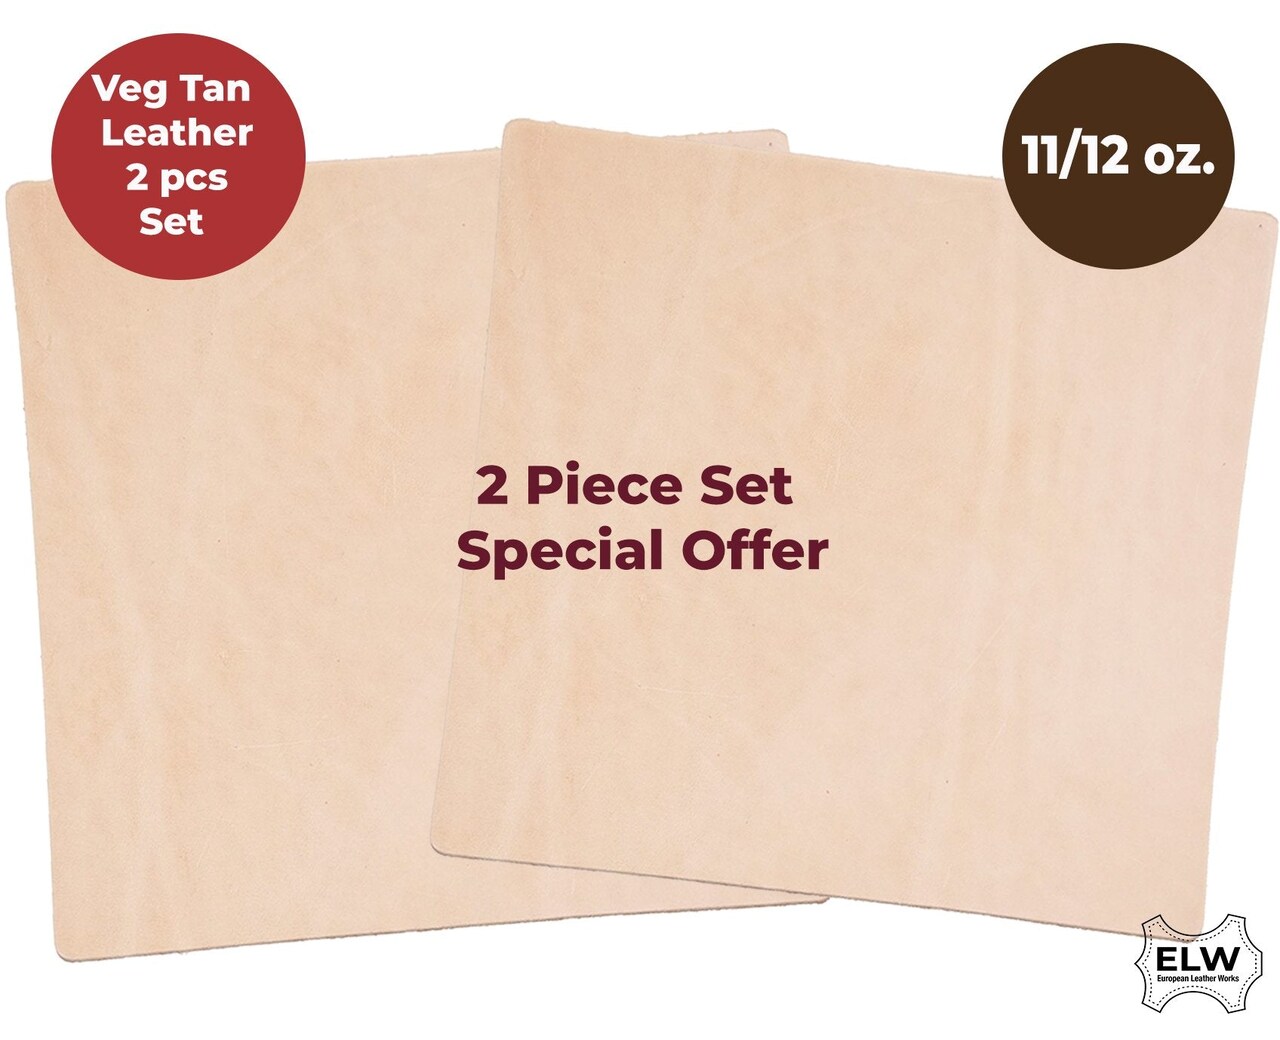 Veg Tan Tooling Leather 11/12 oz (4.4-4.8mm) 2 Piece Special Price Import AA Grade Tooling Cowhide Leather Hide - Vegetable Tanned Leather for Tooling, Carving, Molding, Holster, Projects